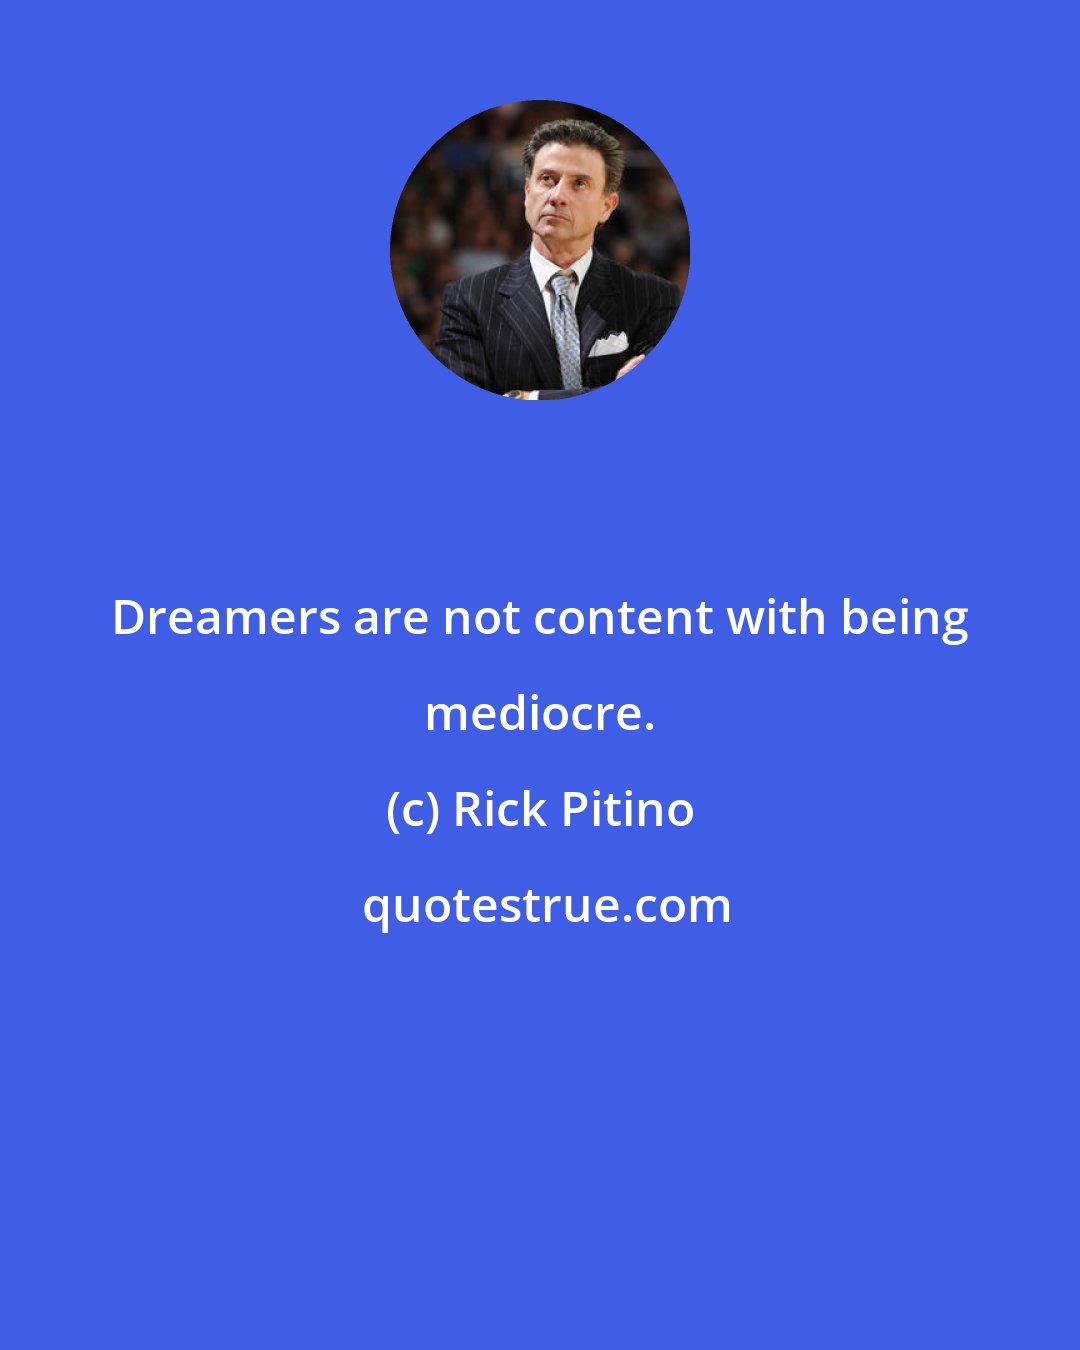 Rick Pitino: Dreamers are not content with being mediocre.